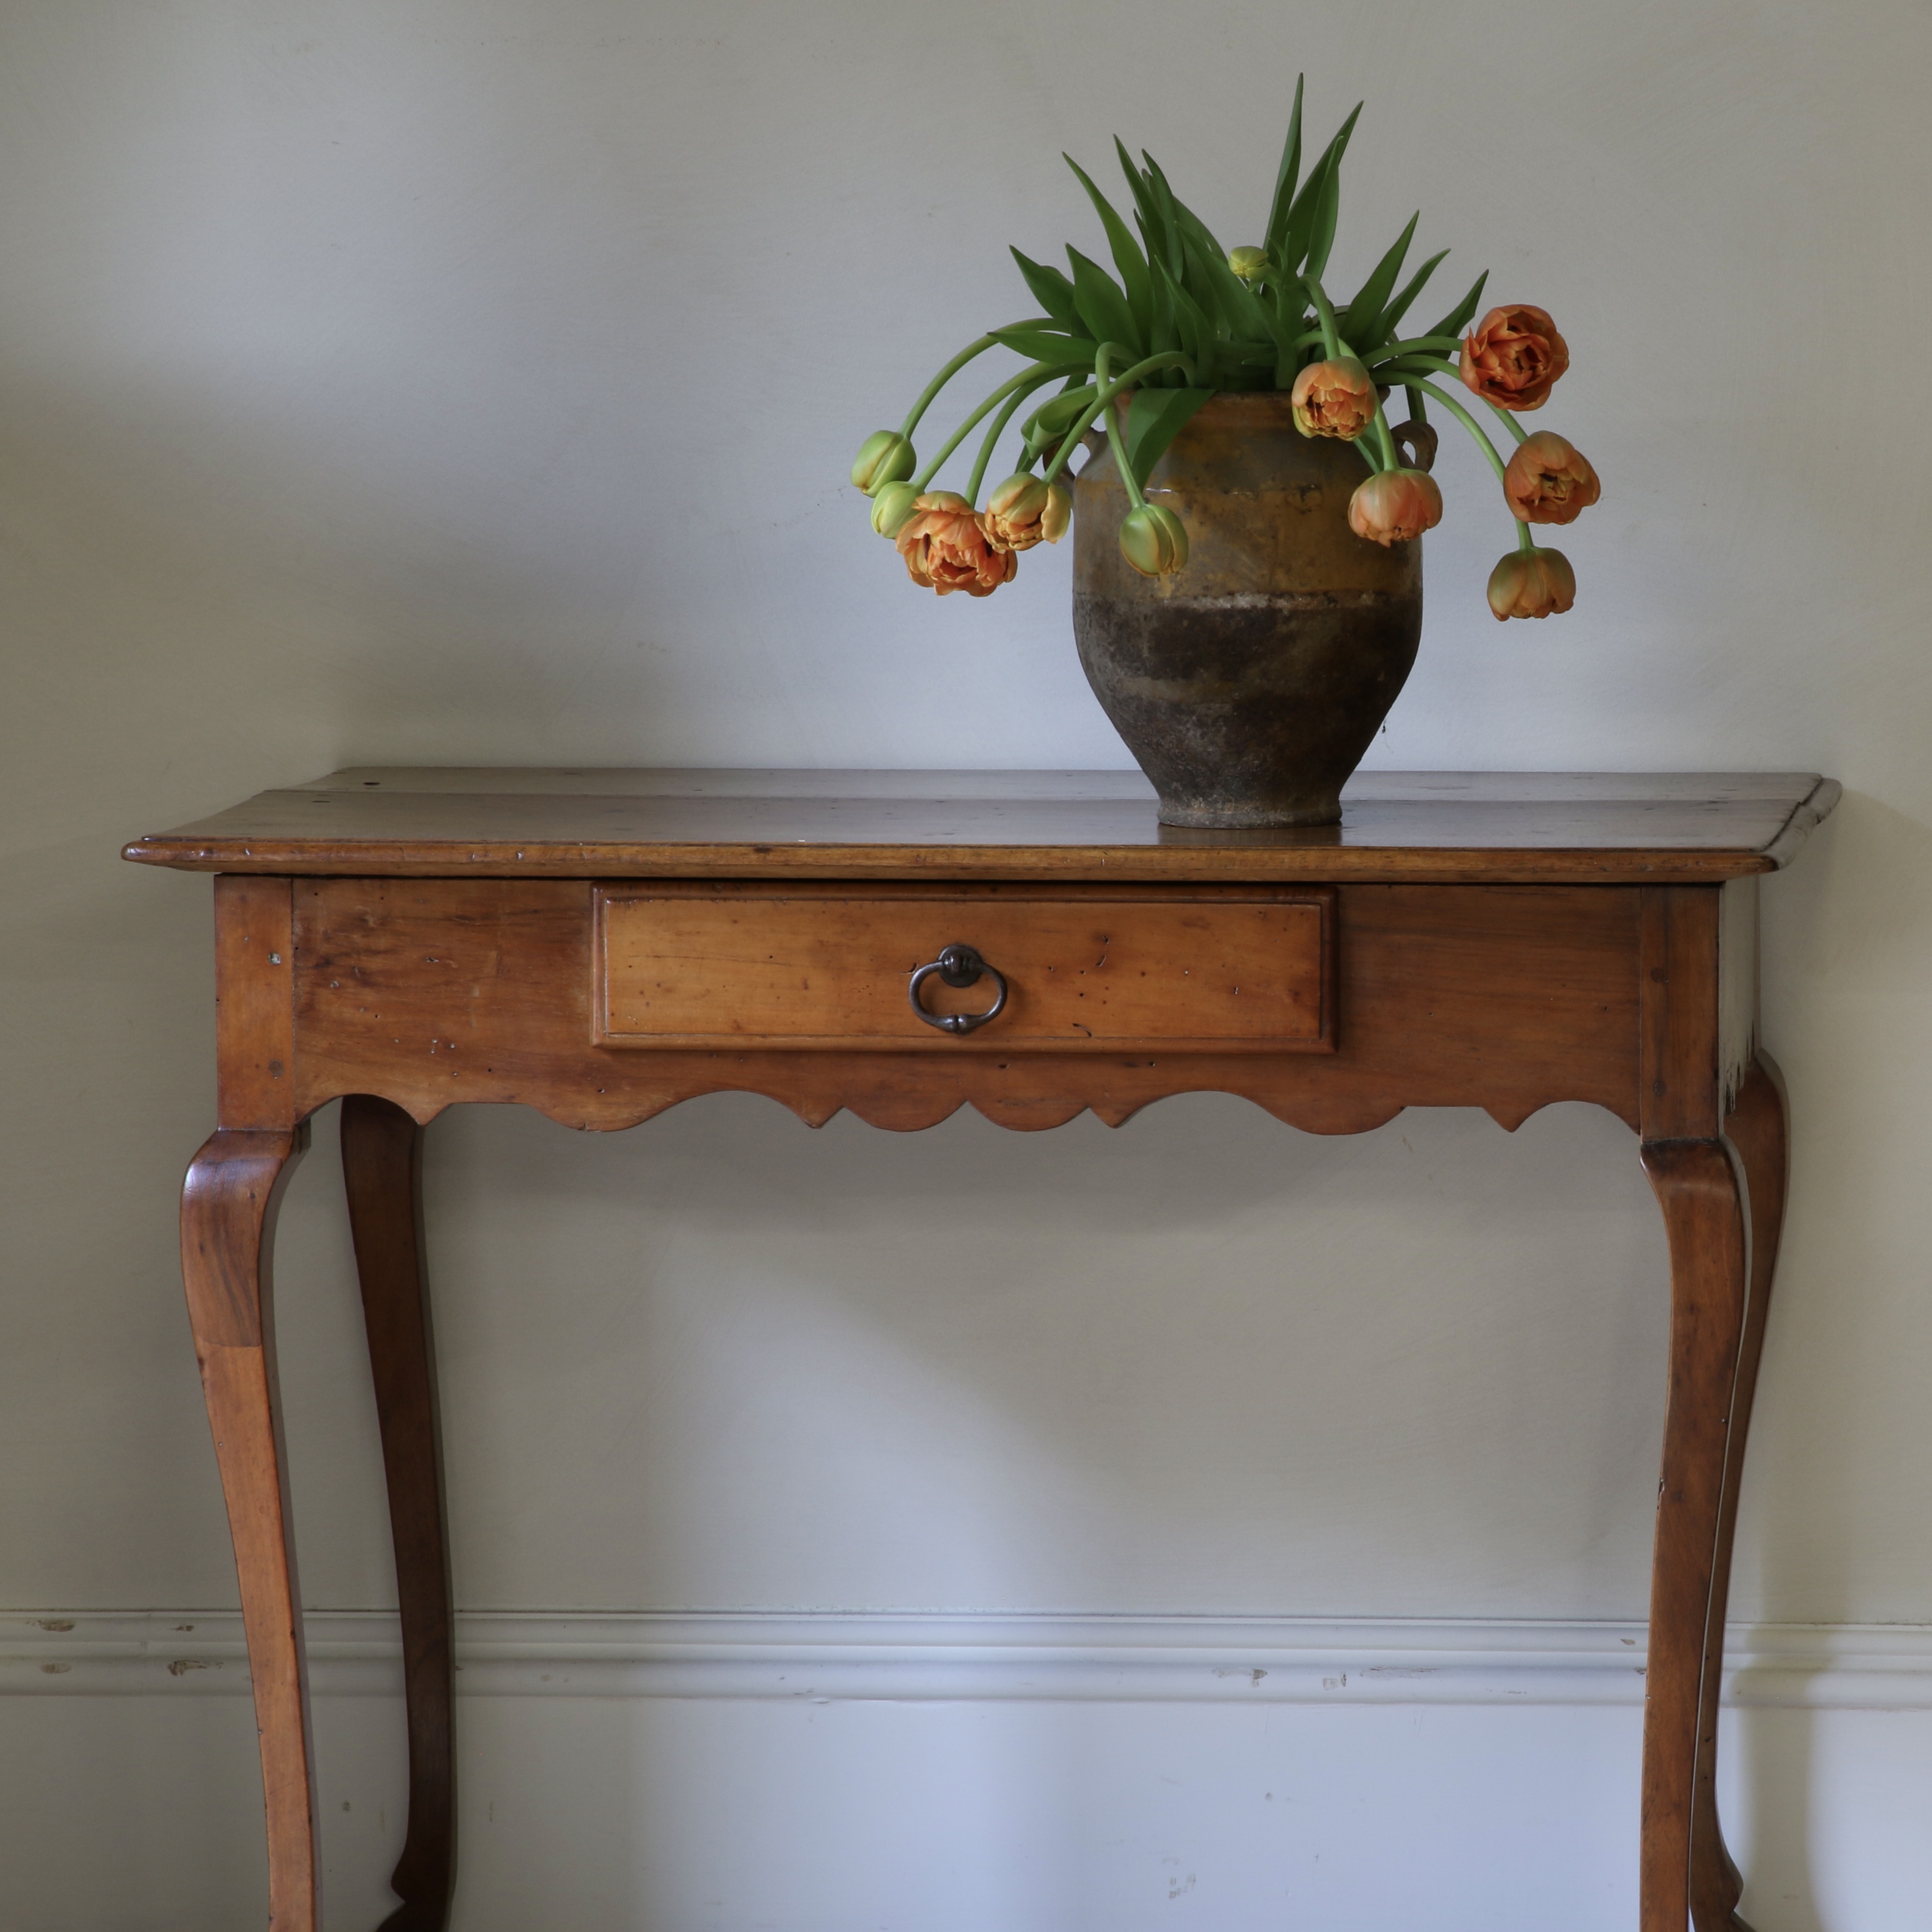 French Provincial Side Table